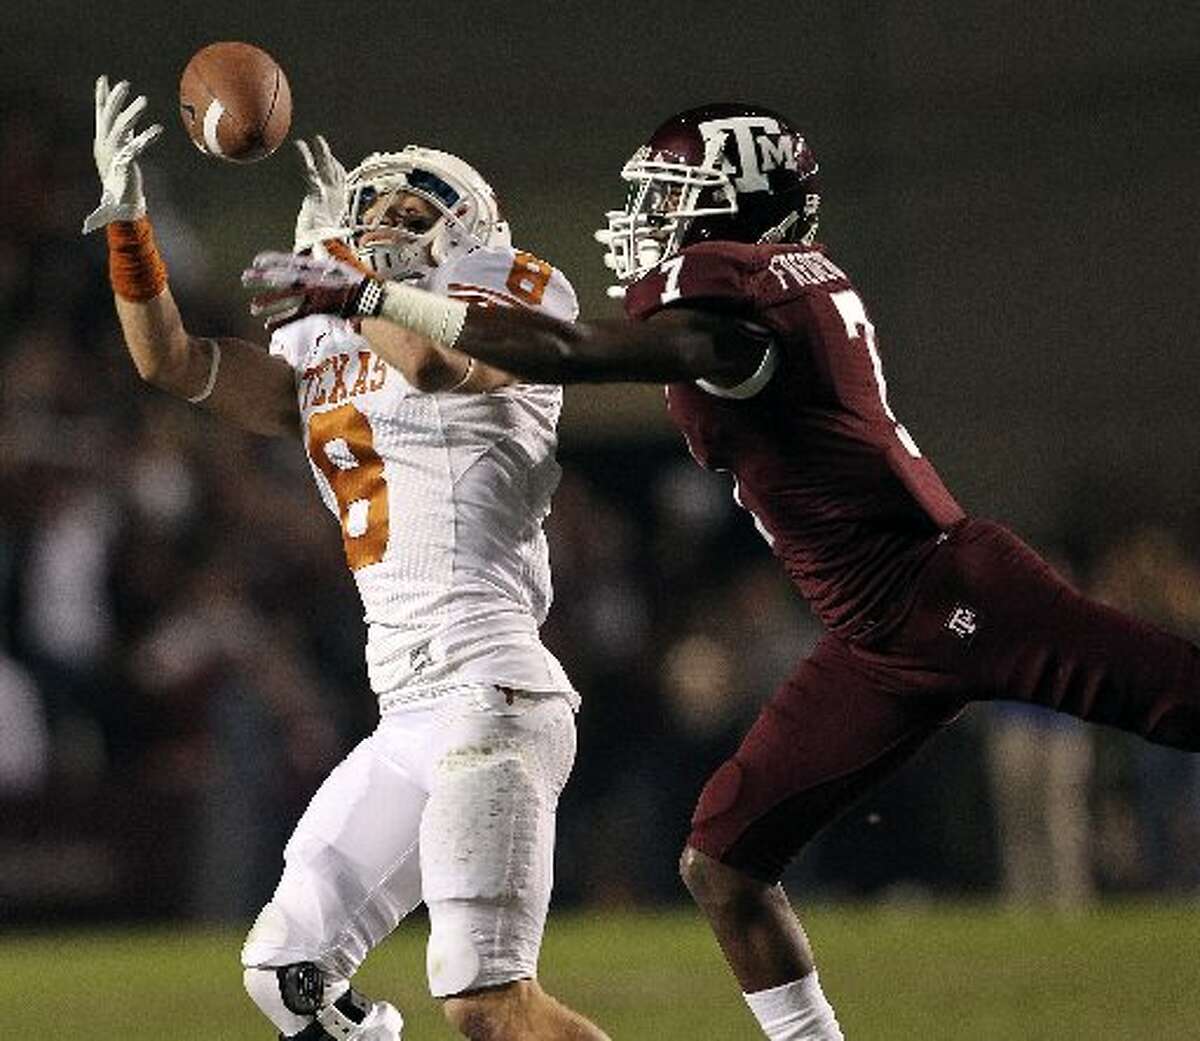 Jaxon Shipley catches a pass in front of Terrence Frederick in the first quarter as Texas A&M hosts UT at Kyle Field in College Station on November 24, 2011. Tom Reel/Express-News